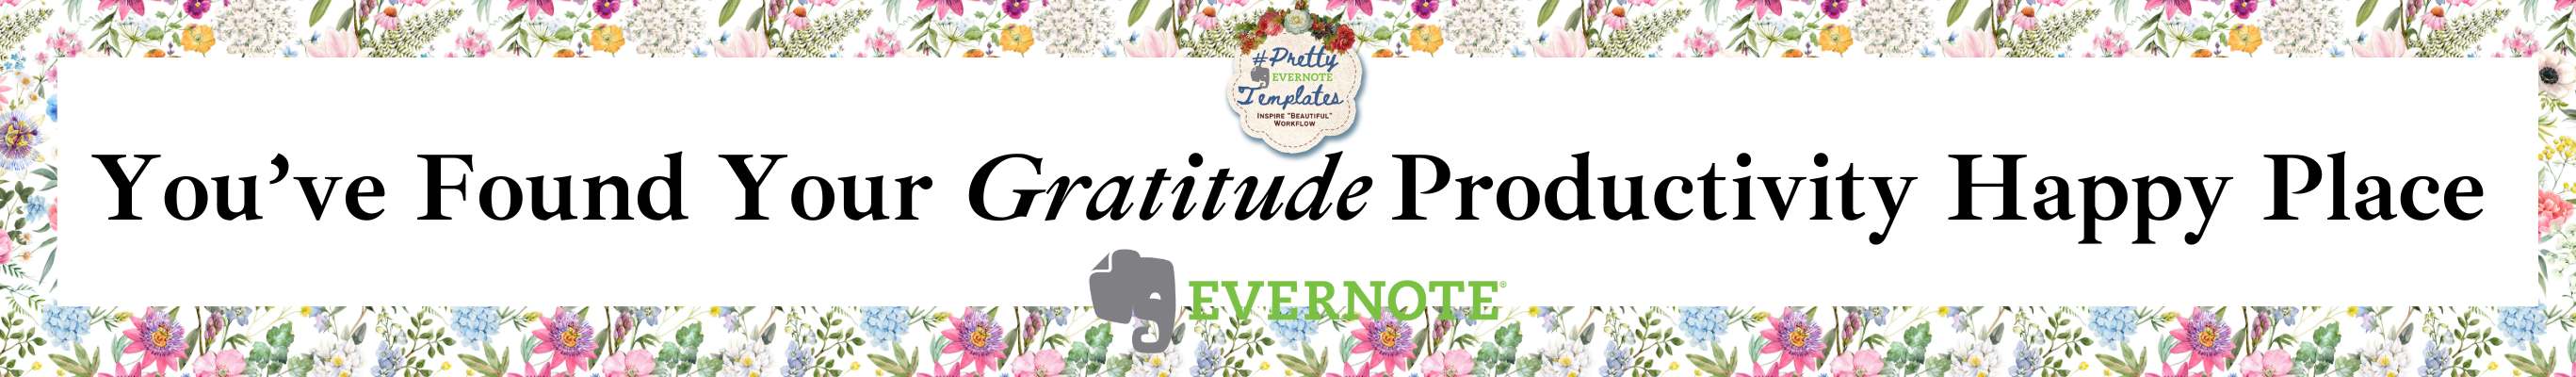 You've Found Your Gratitude Productivity Happy Place, Kristen Wambach Evernote Expert Planners and Templates 